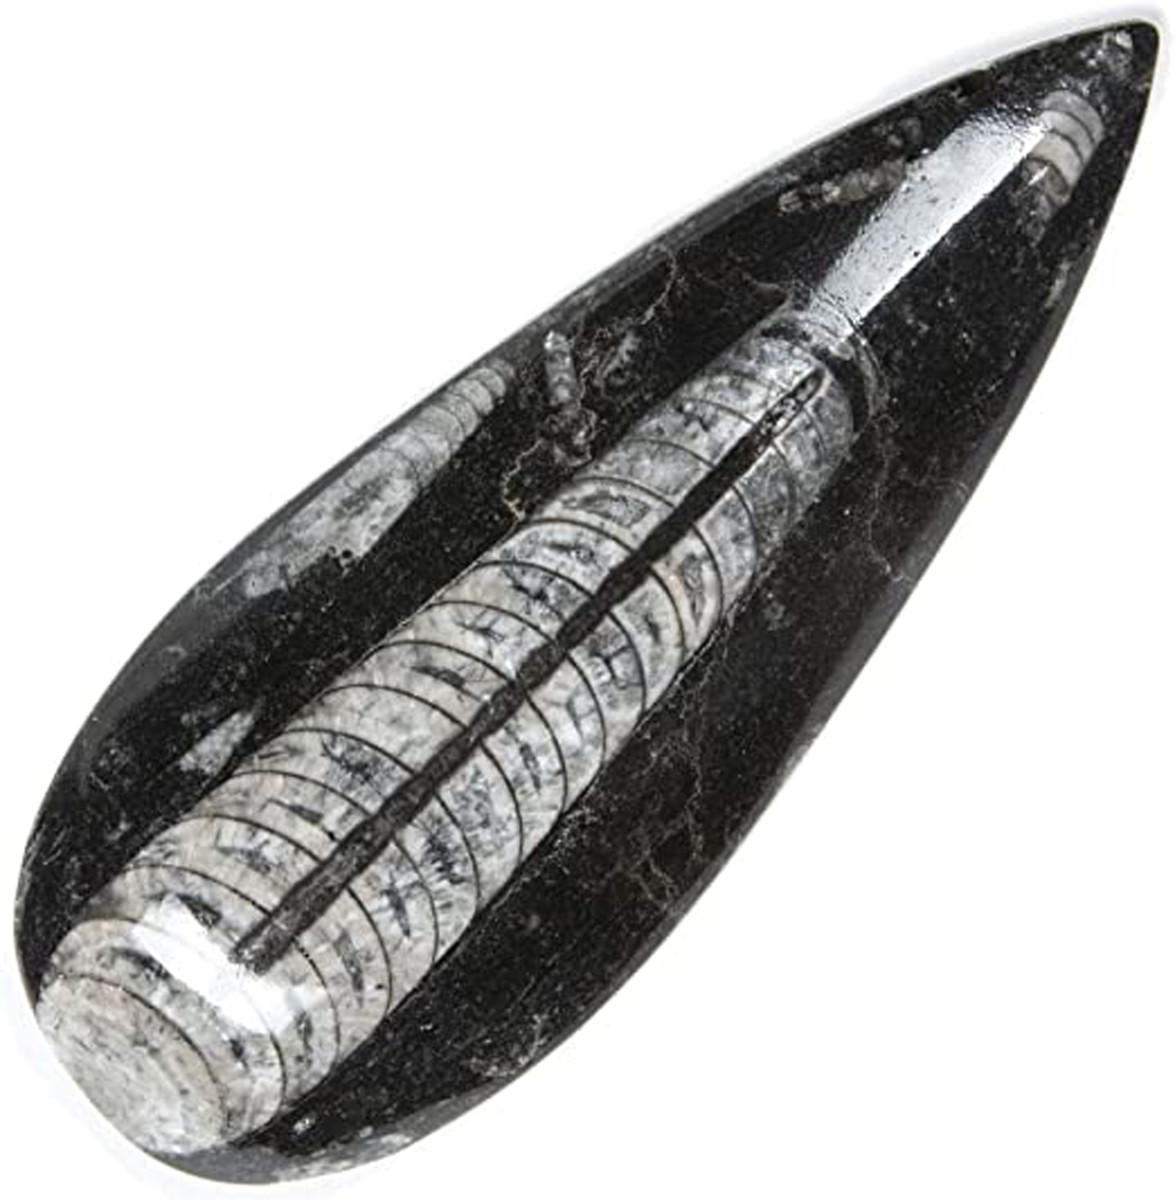 Polished Fossil Straight-Shelled Cephalopod Nautiloid i.e. Orthoceras meaning "straight horn"